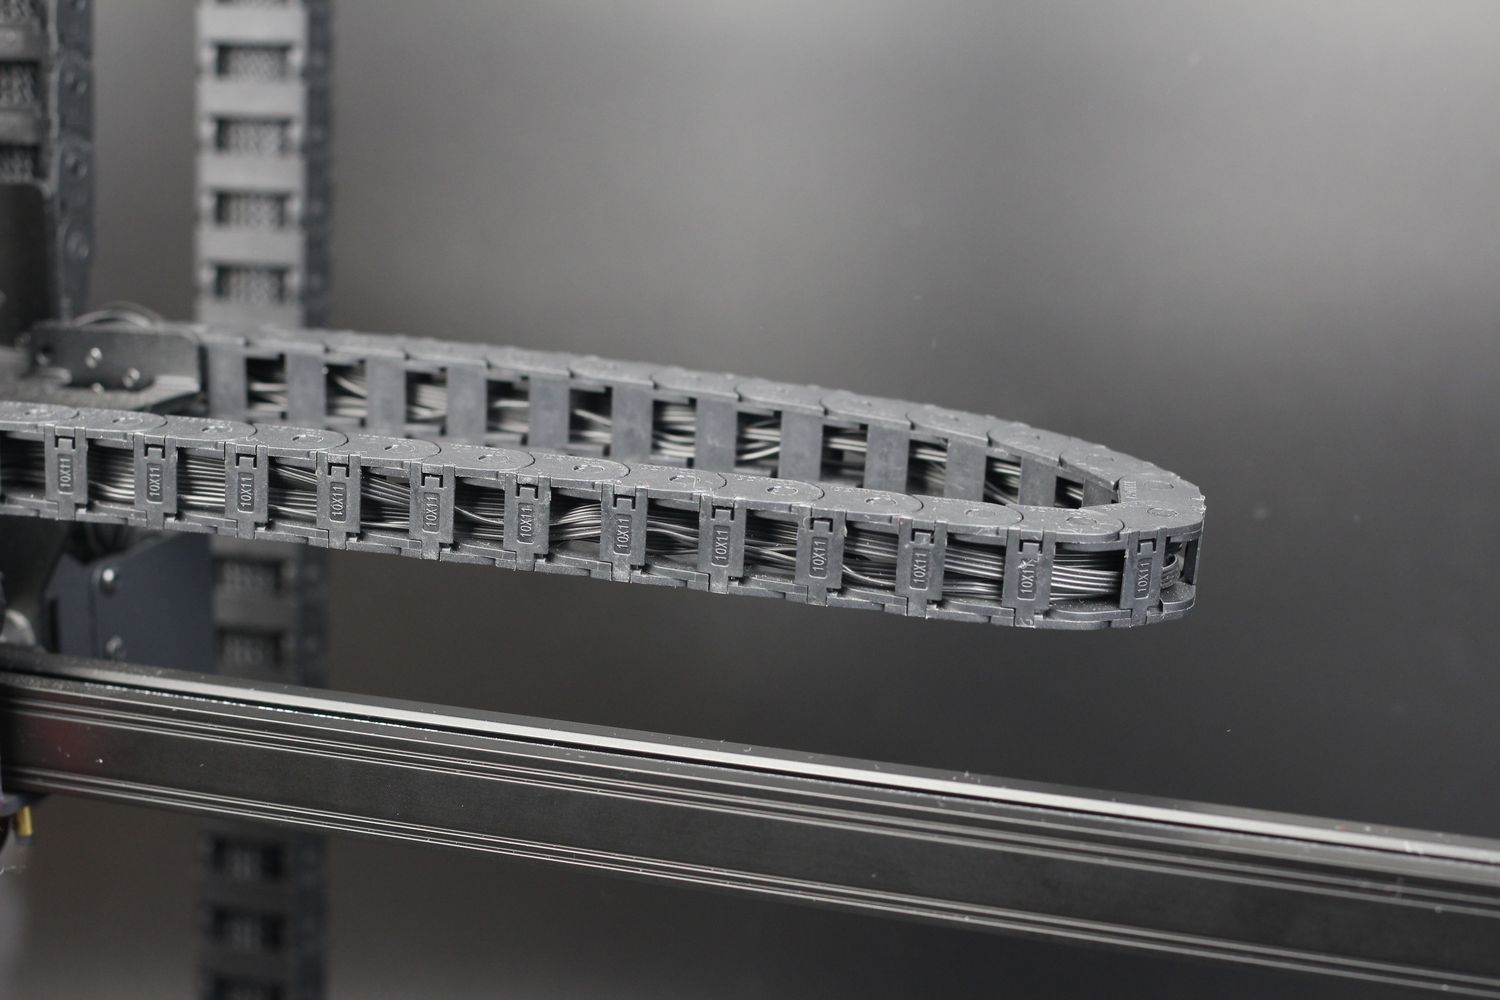 CR M4 Drag Chains1 | Creality CR-M4 Review: Large Format 3D Printer